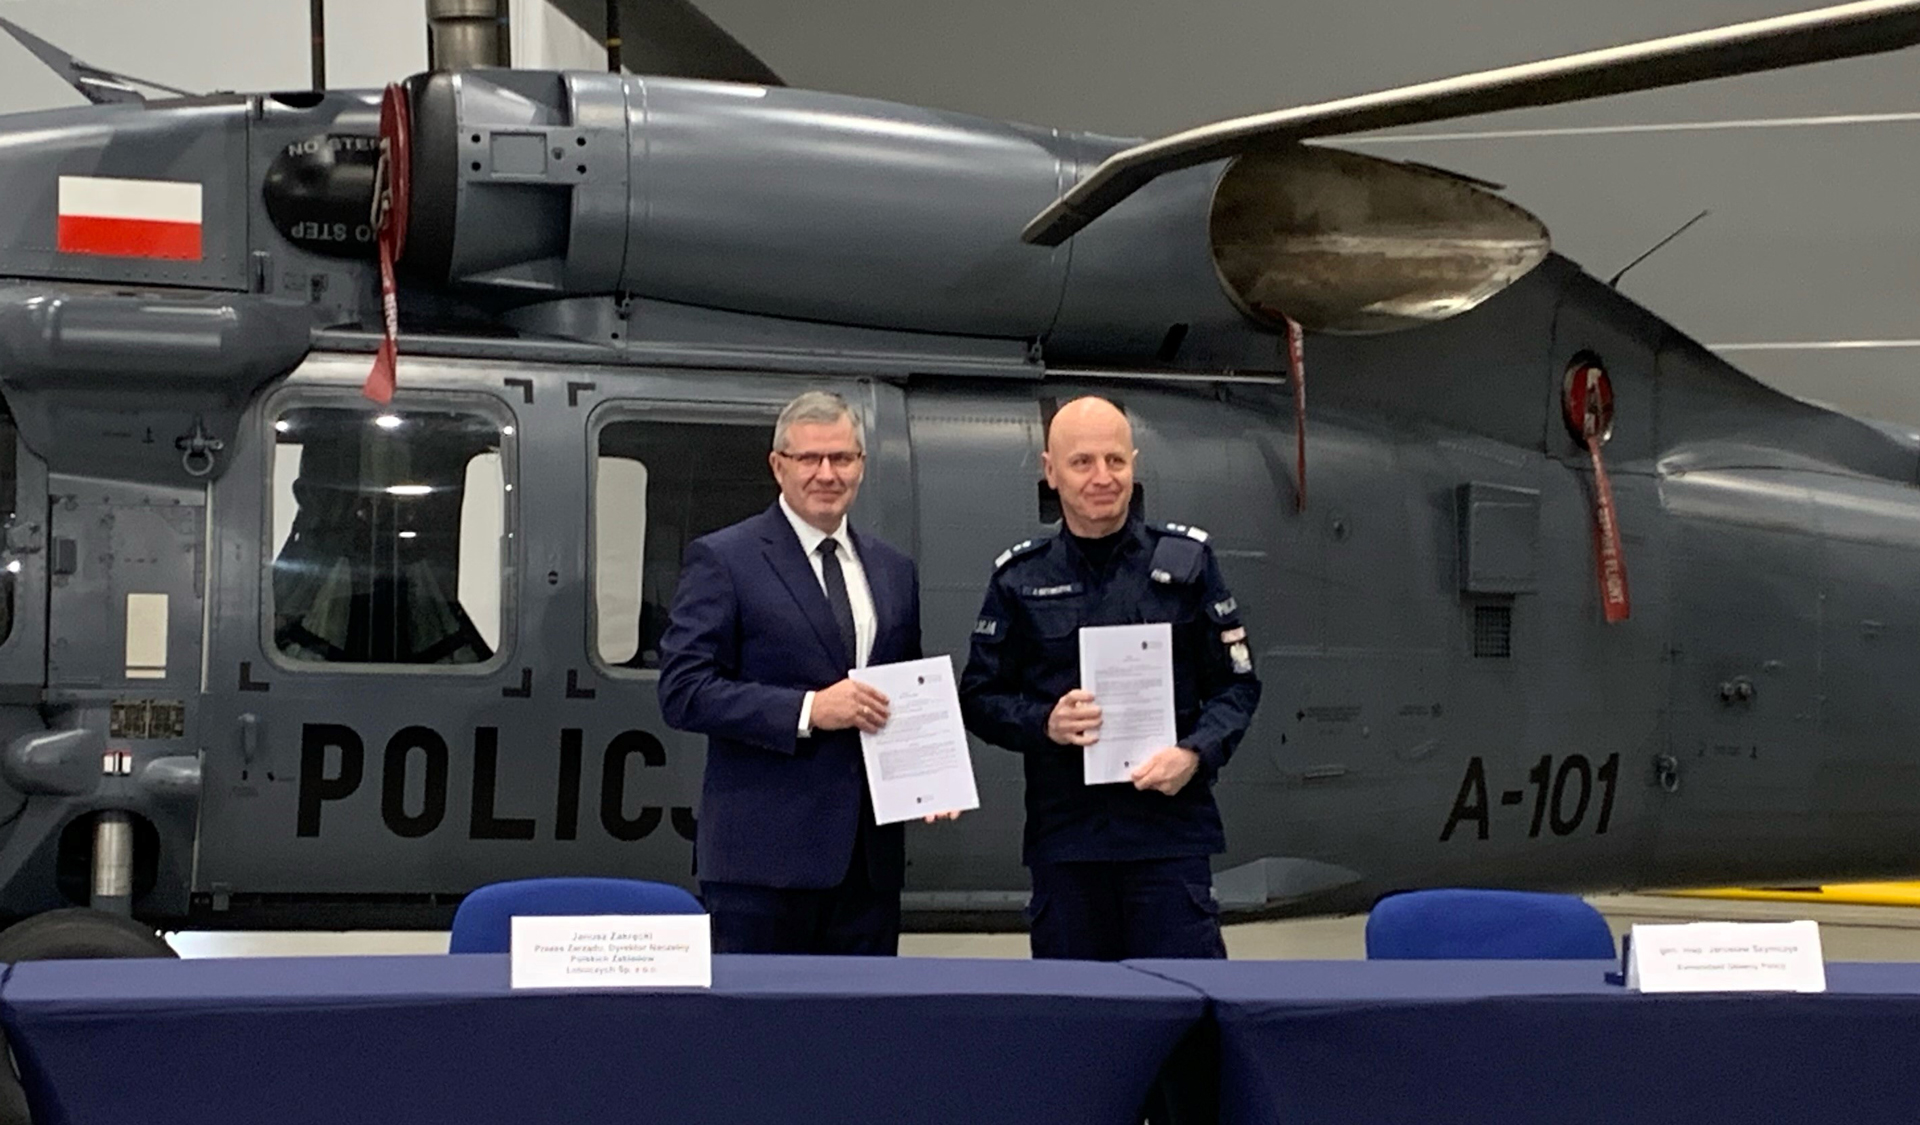 Janusz Zakrecki, PZL Mielec President and General Director, stands with Polish National Police Commander-in-Chief Gen. Insp. Jarosław Szymczyk after finalizing a contract for two additional S-70i Black Hawk helicopters on Dec. 9, 2022.